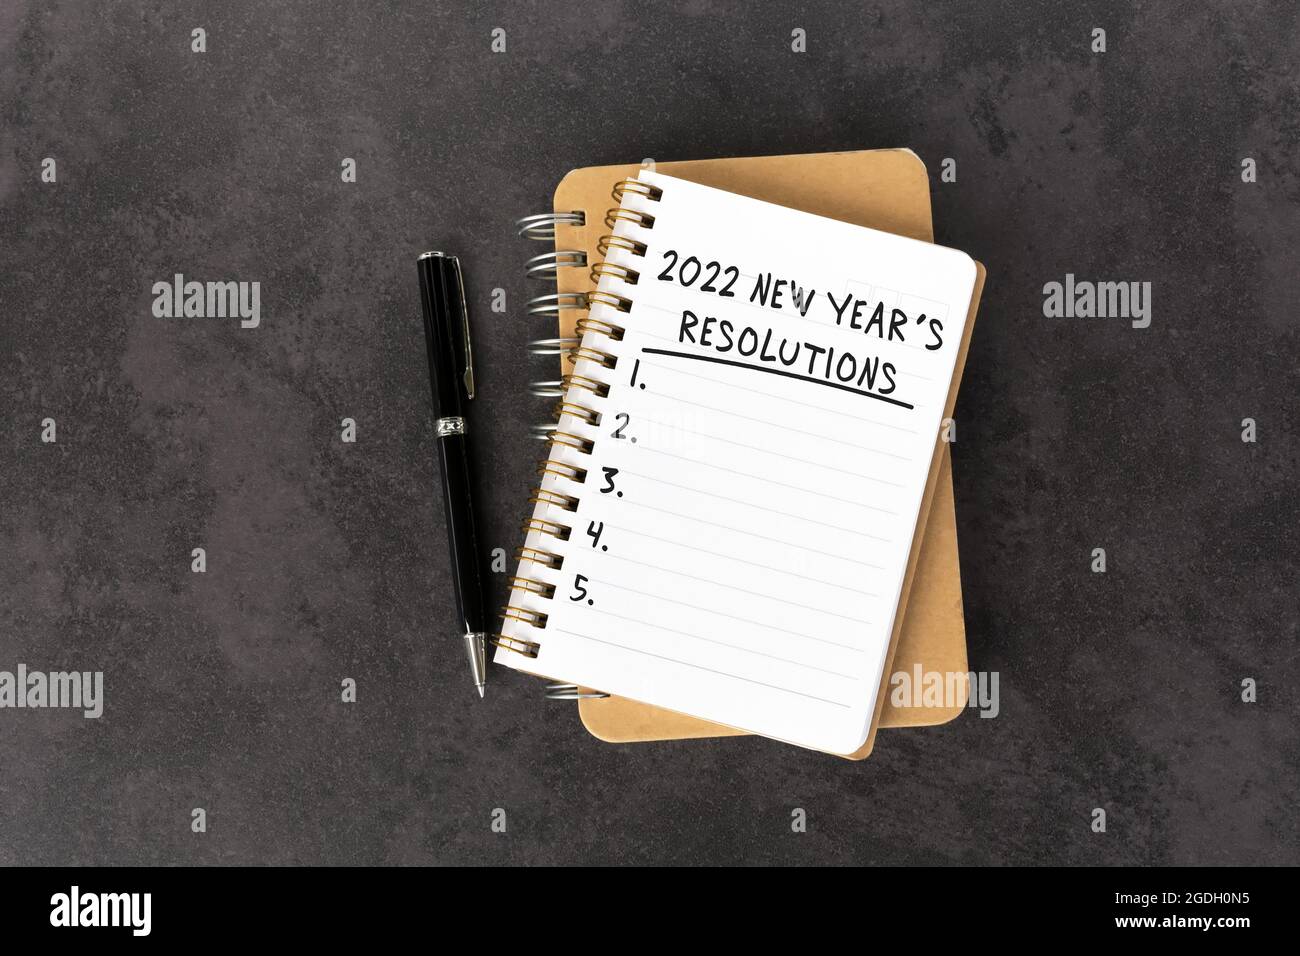 2022 New Year's Resolutions Text on Note Pad Stock Photo - Alamy